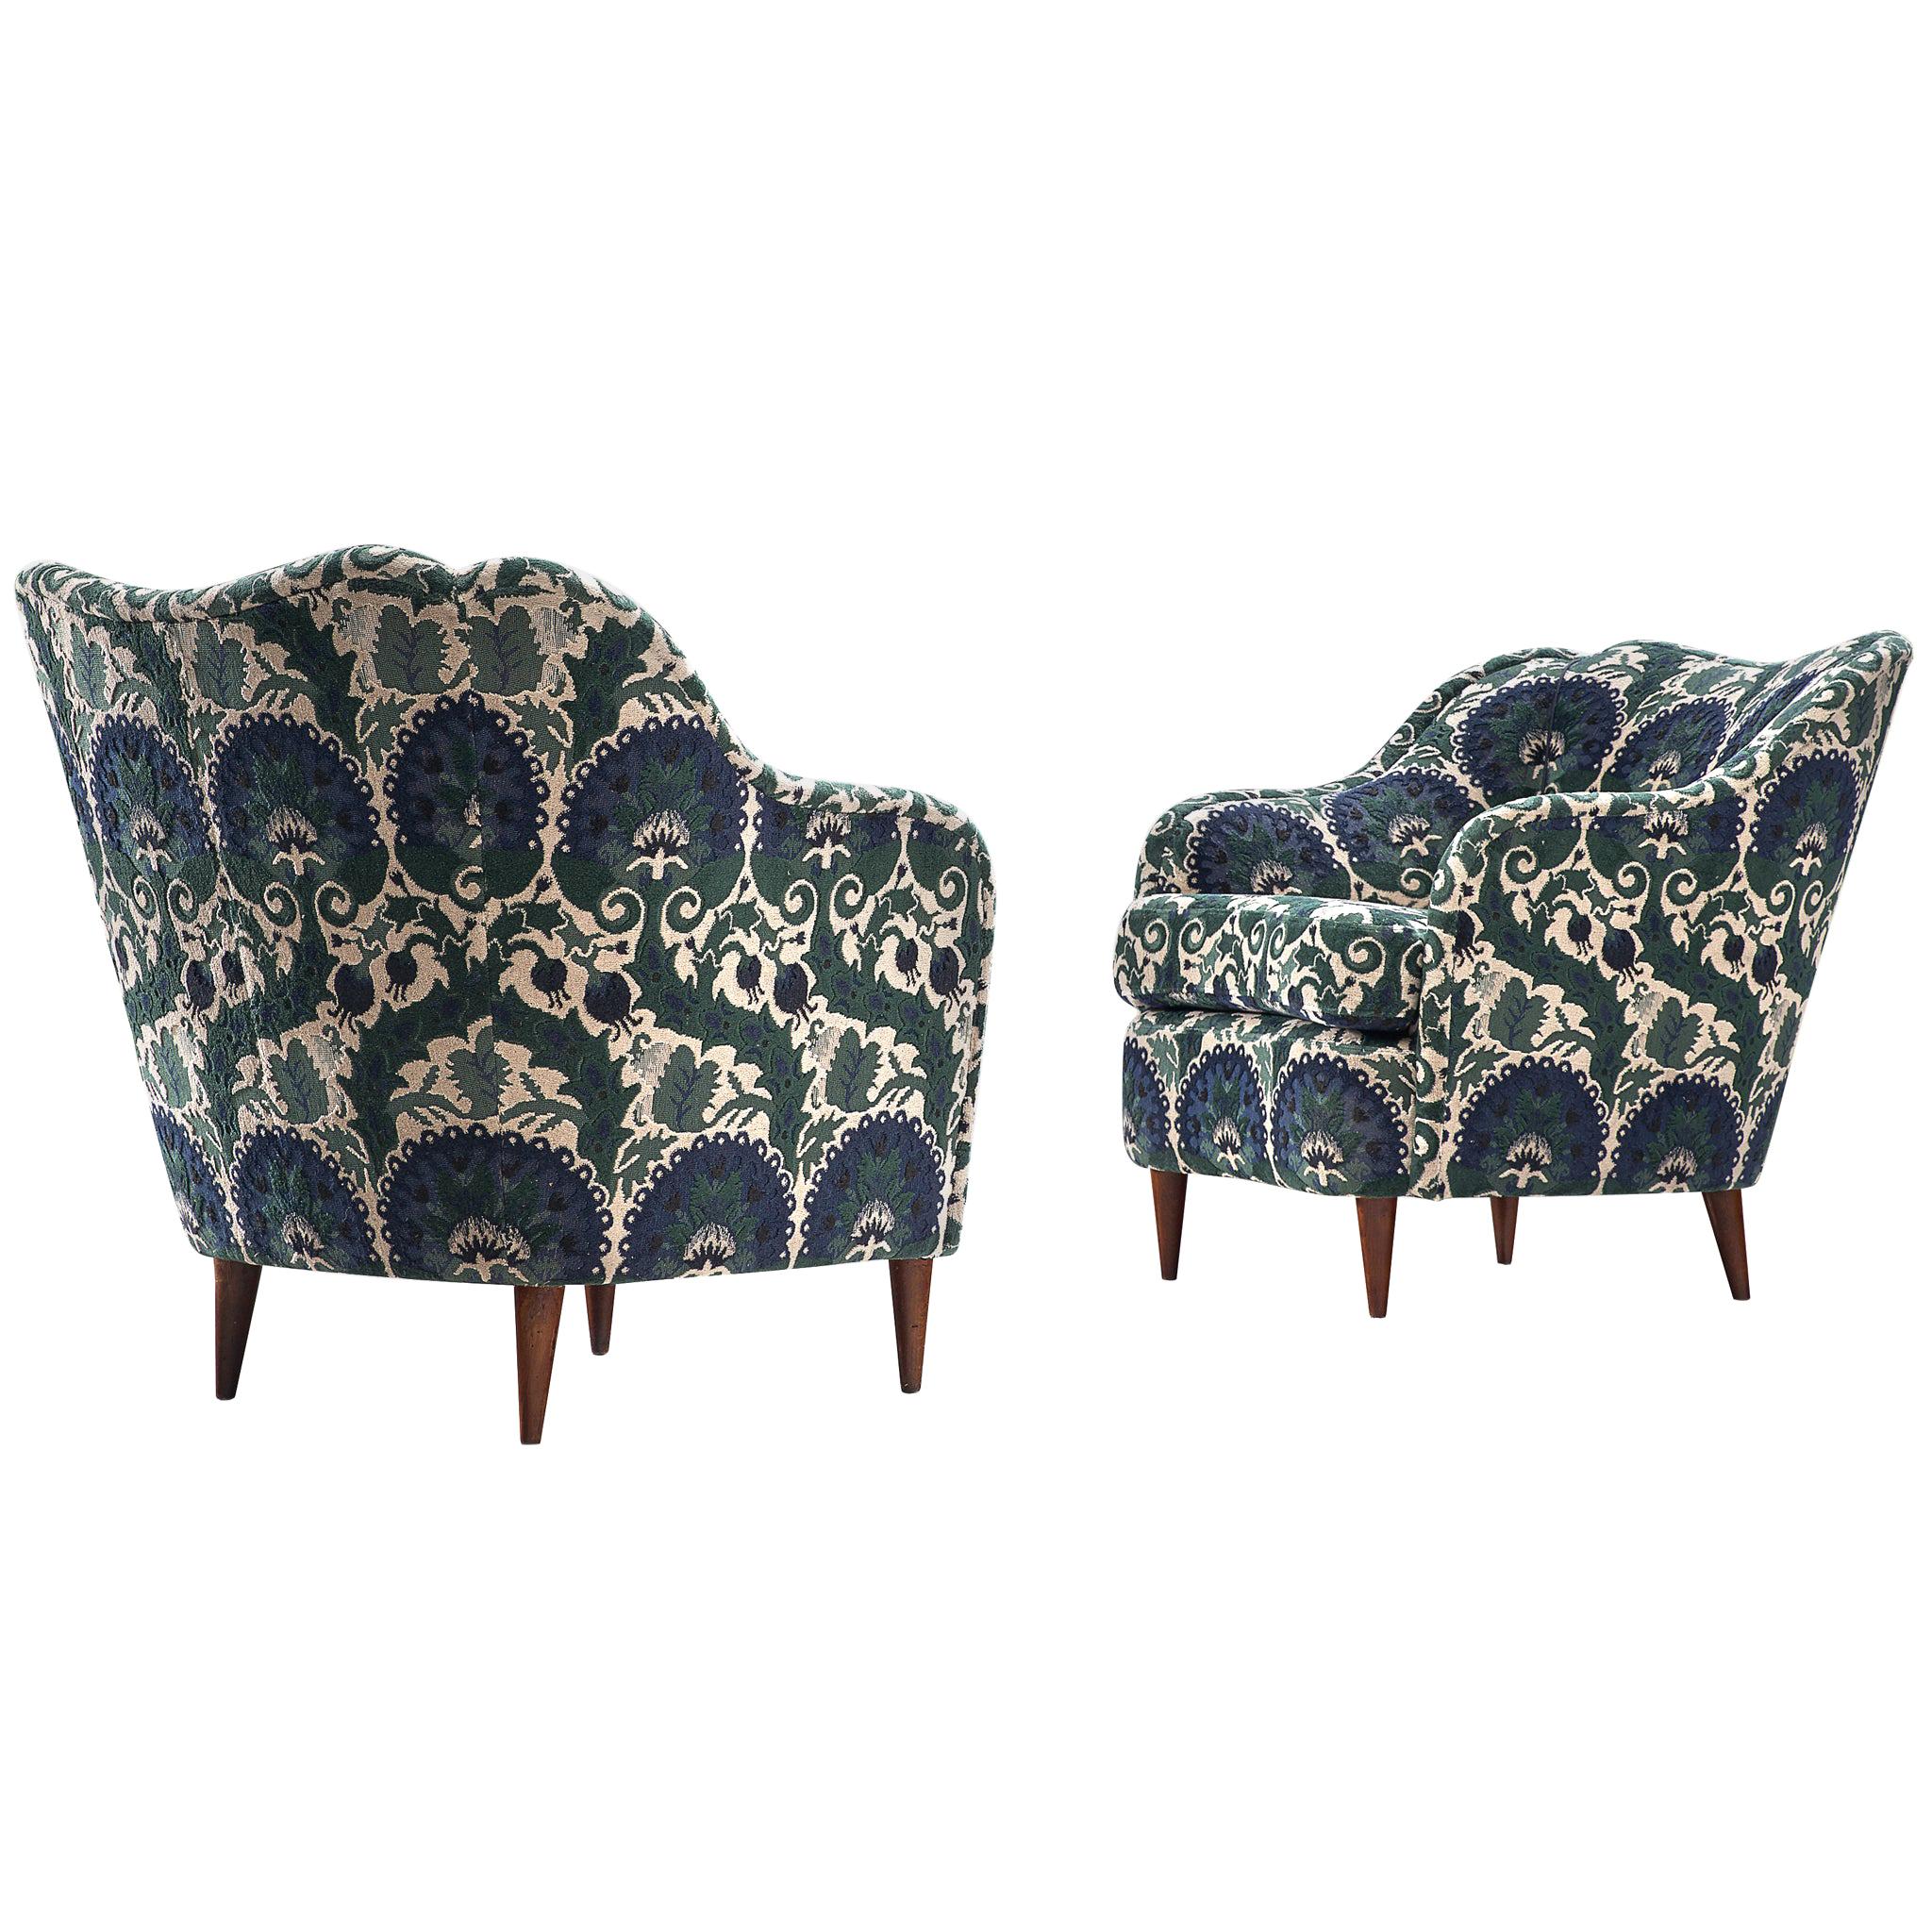 Pair of Lounge Chairs in ZAK+FOX ‘Fantasma’ Collection 2020 Upholstery